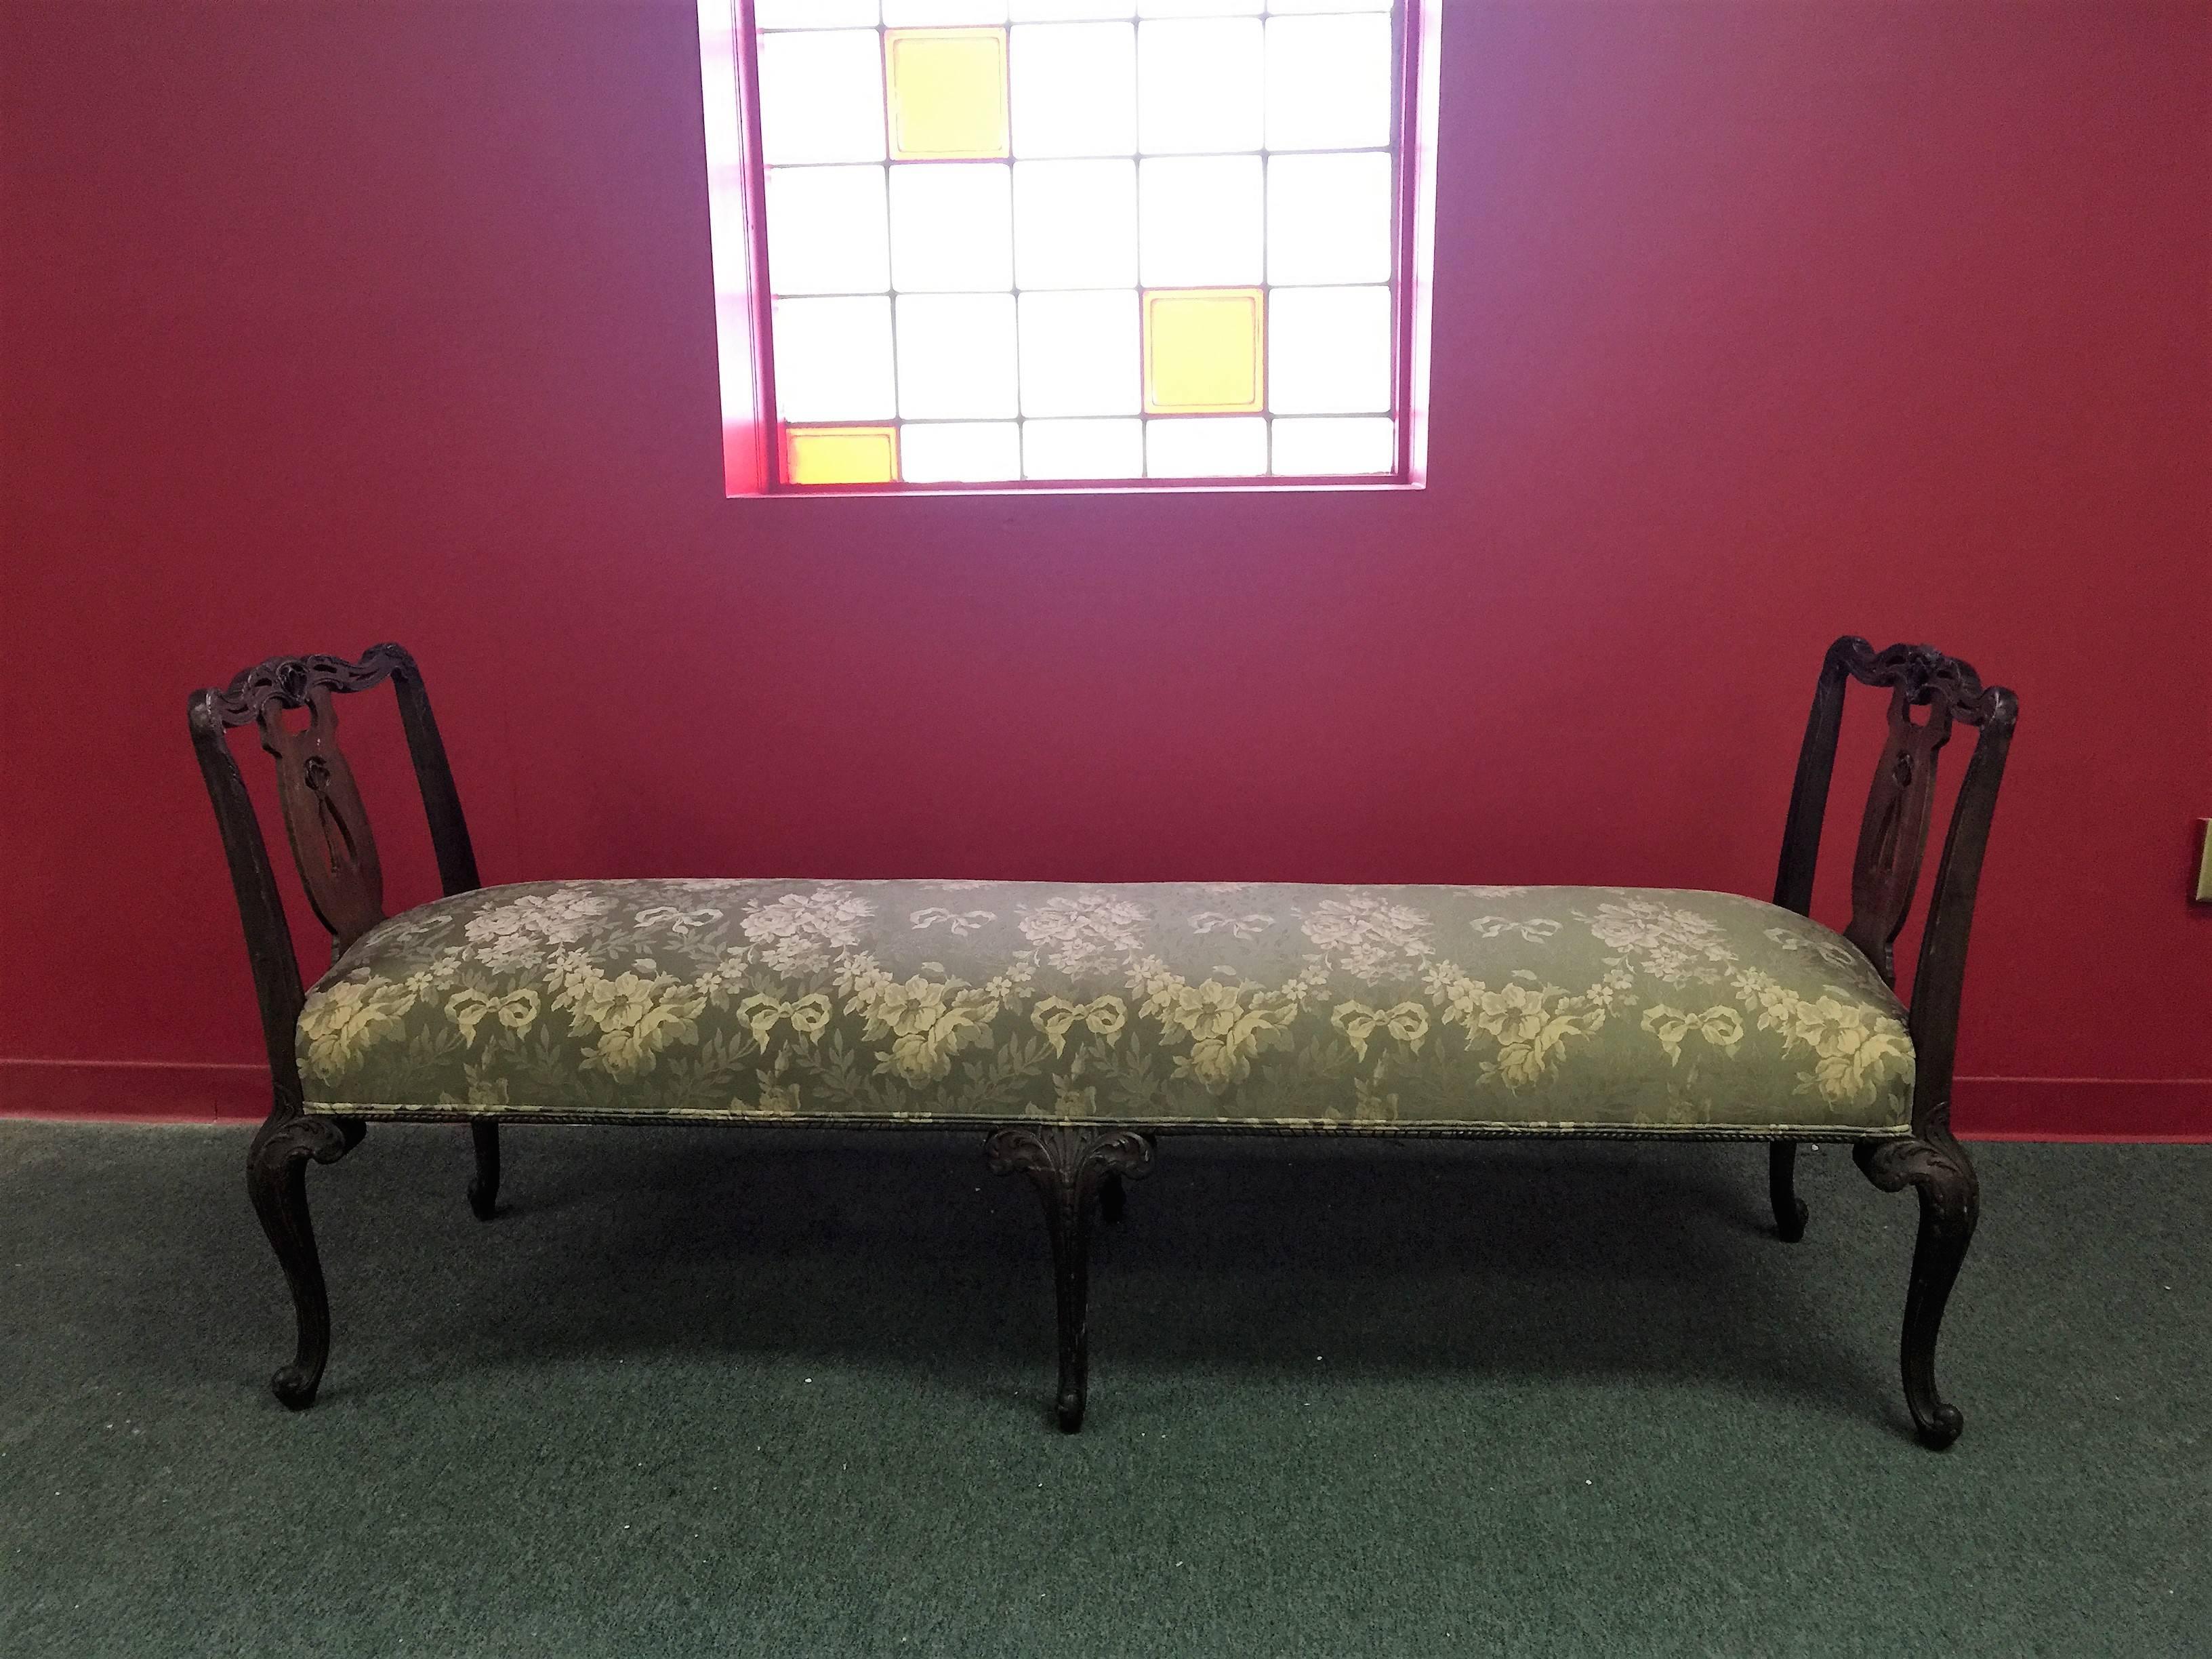 Nicely carved dark mahogany Victorian era sitting bench. Long length suitable for an entrance way, sitting room or anywhere you need an antique bench. Unusual with six nicely scrolled Legs and an Nicely cutout design on the Ends.